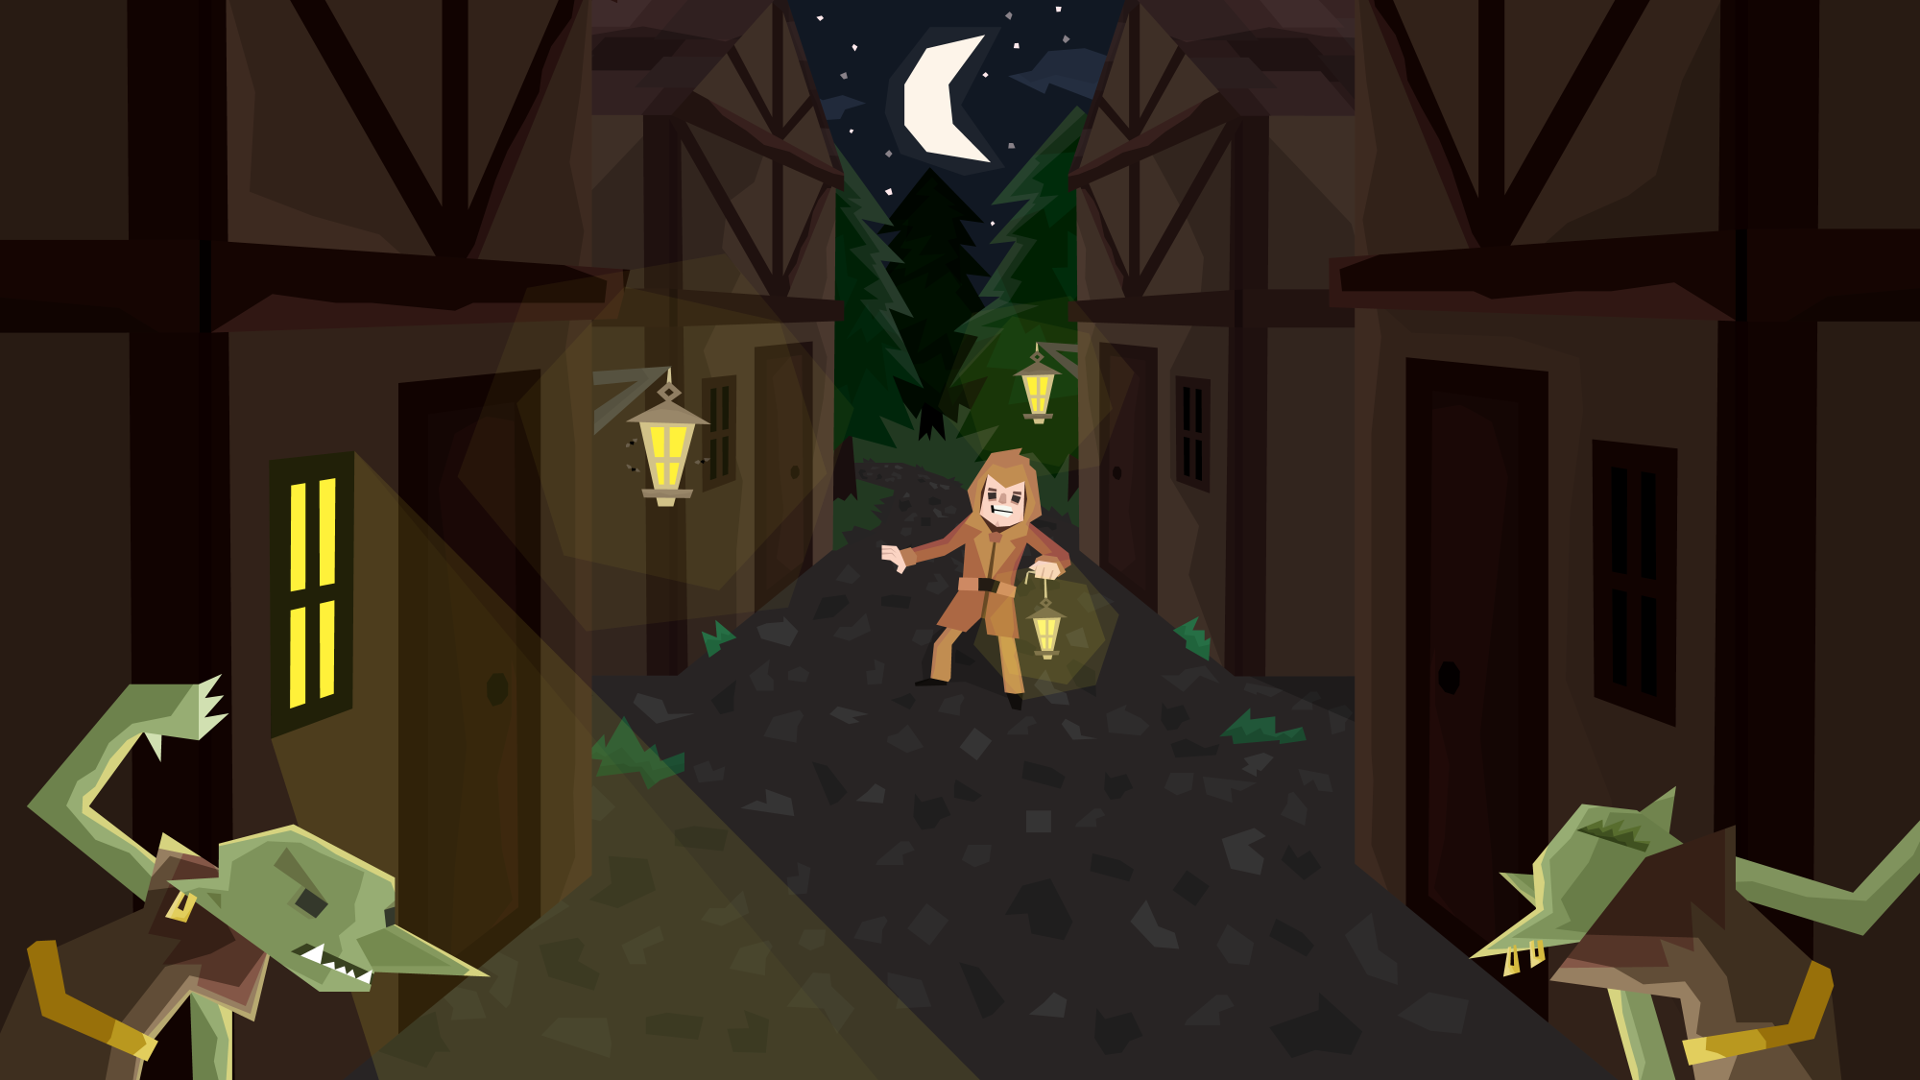 A village at night with a scared villager being chased by two Goblins.